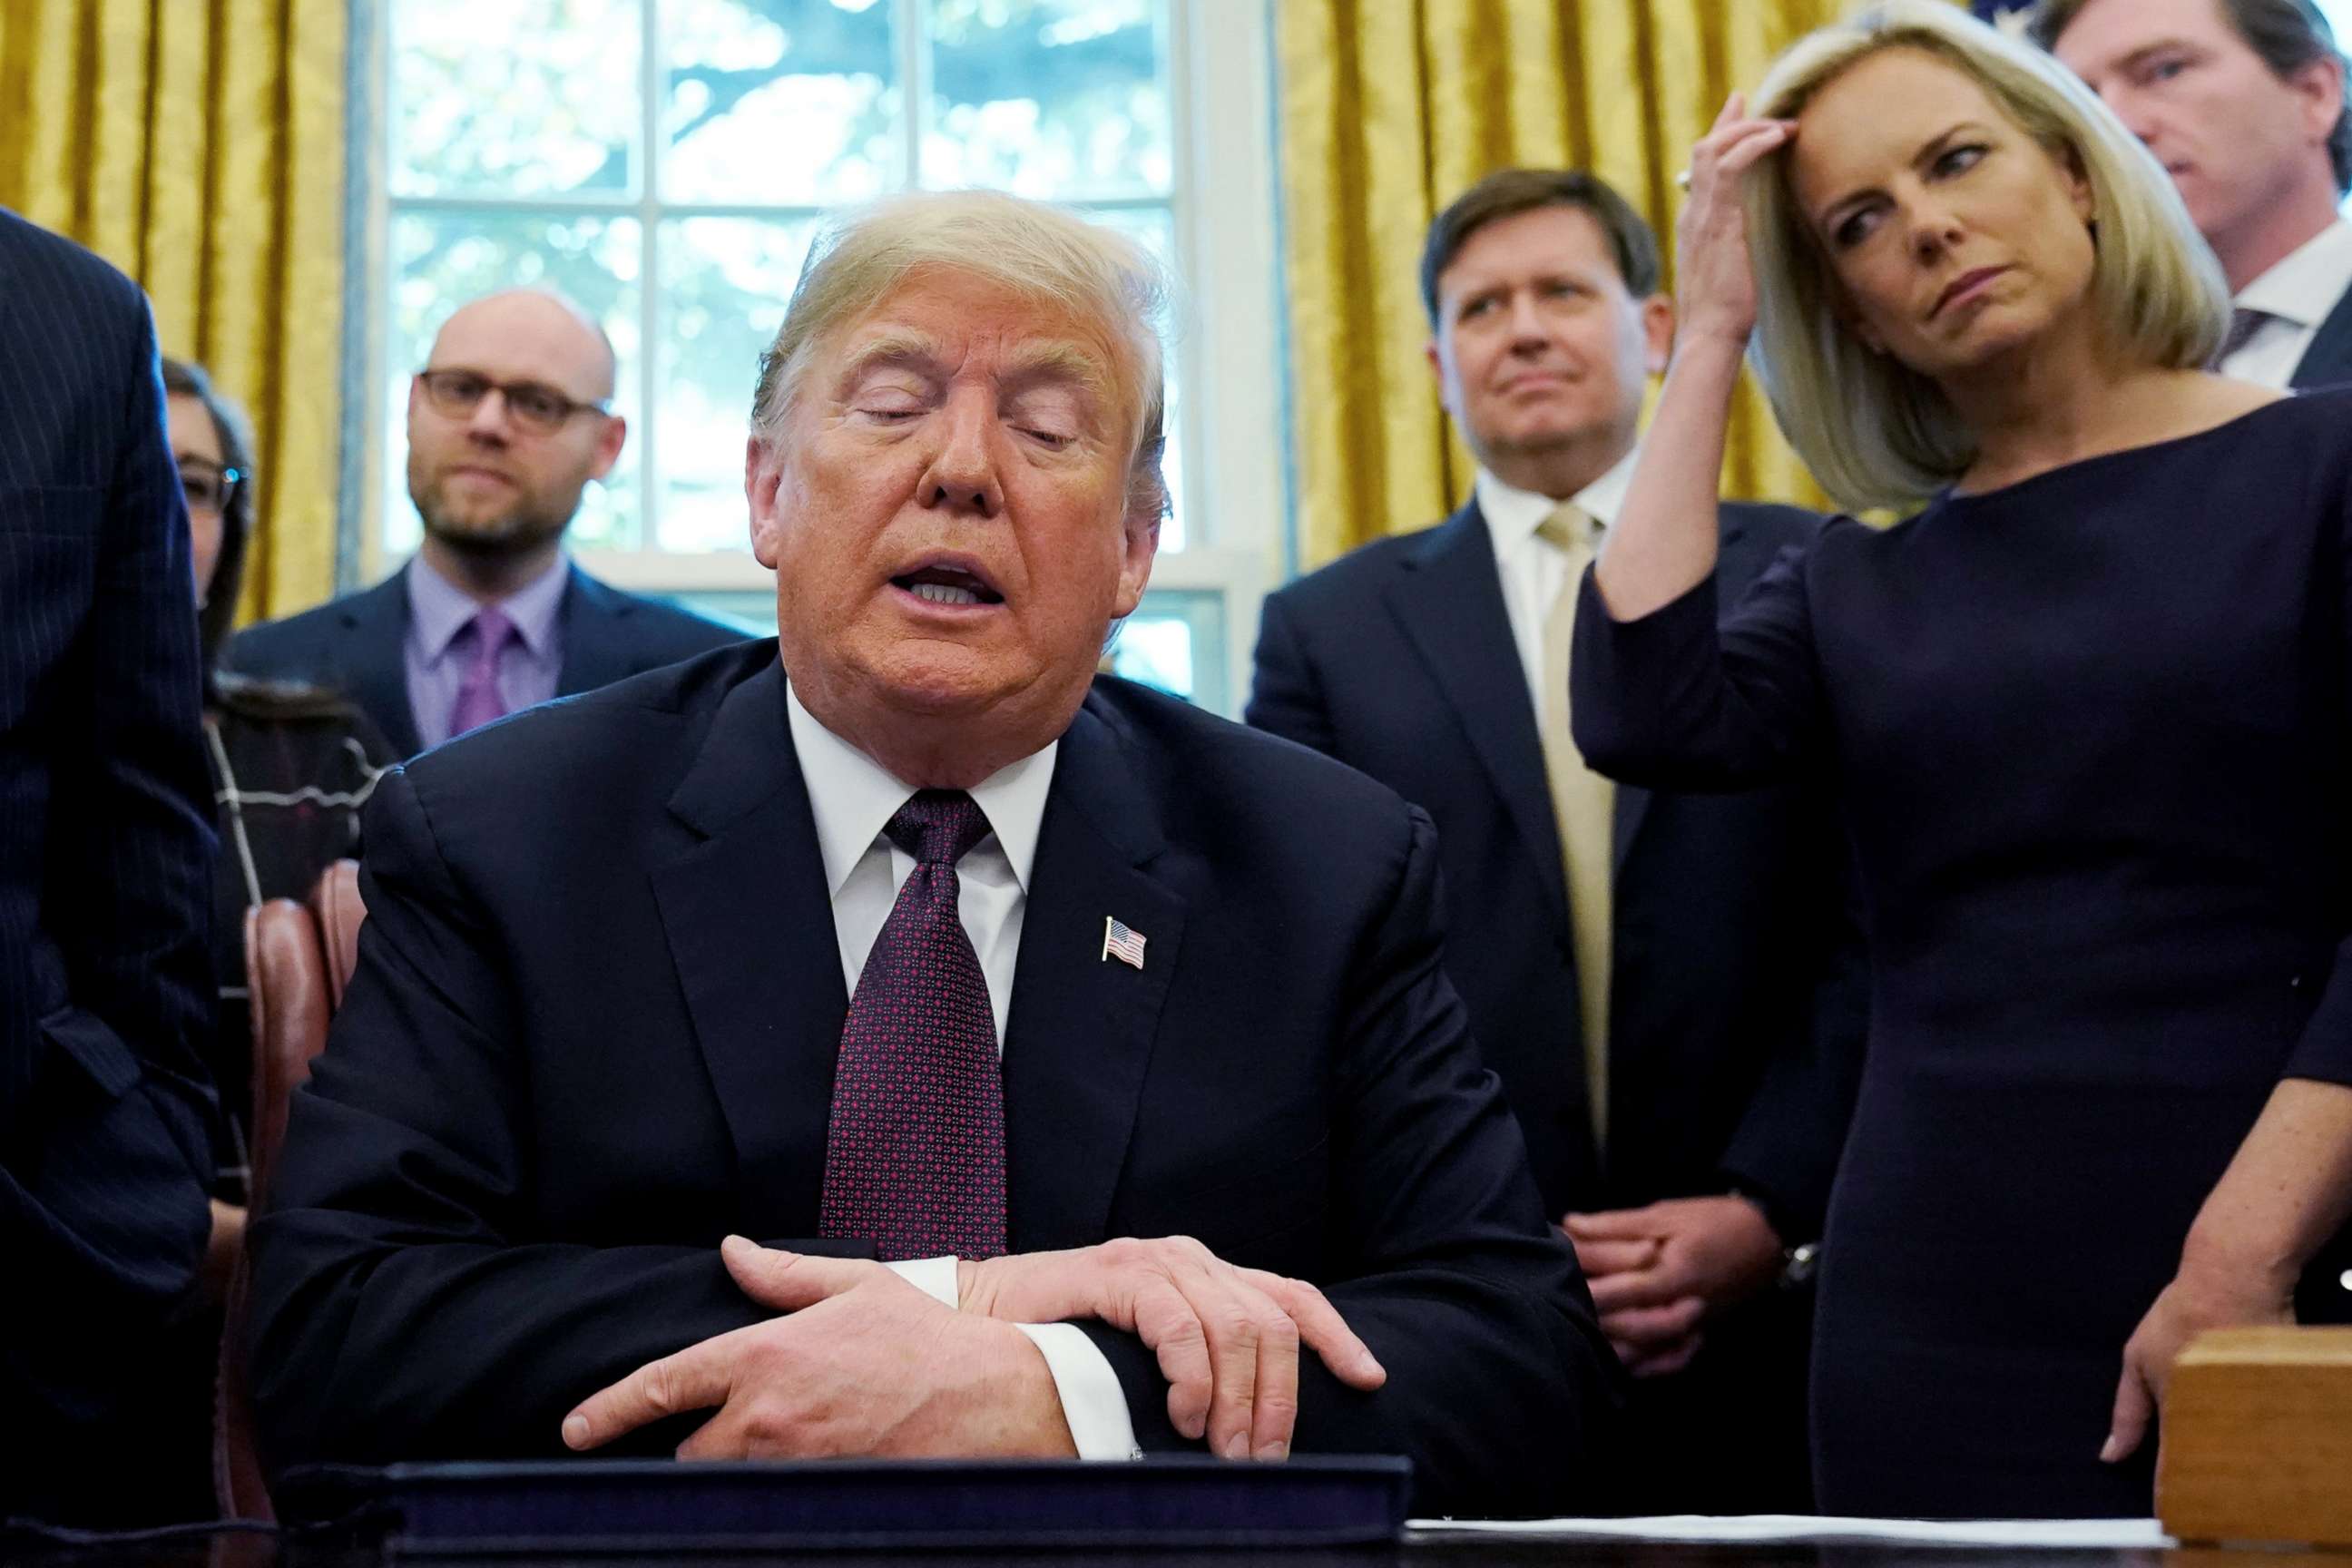 PHOTO: President Donald Trump talks to reporters as Department of Homeland Security Secretary Kirstjen Nielsen, right, looks on at a signing ceremony in the Oval Office of the White House, Nov. 16, 2018.